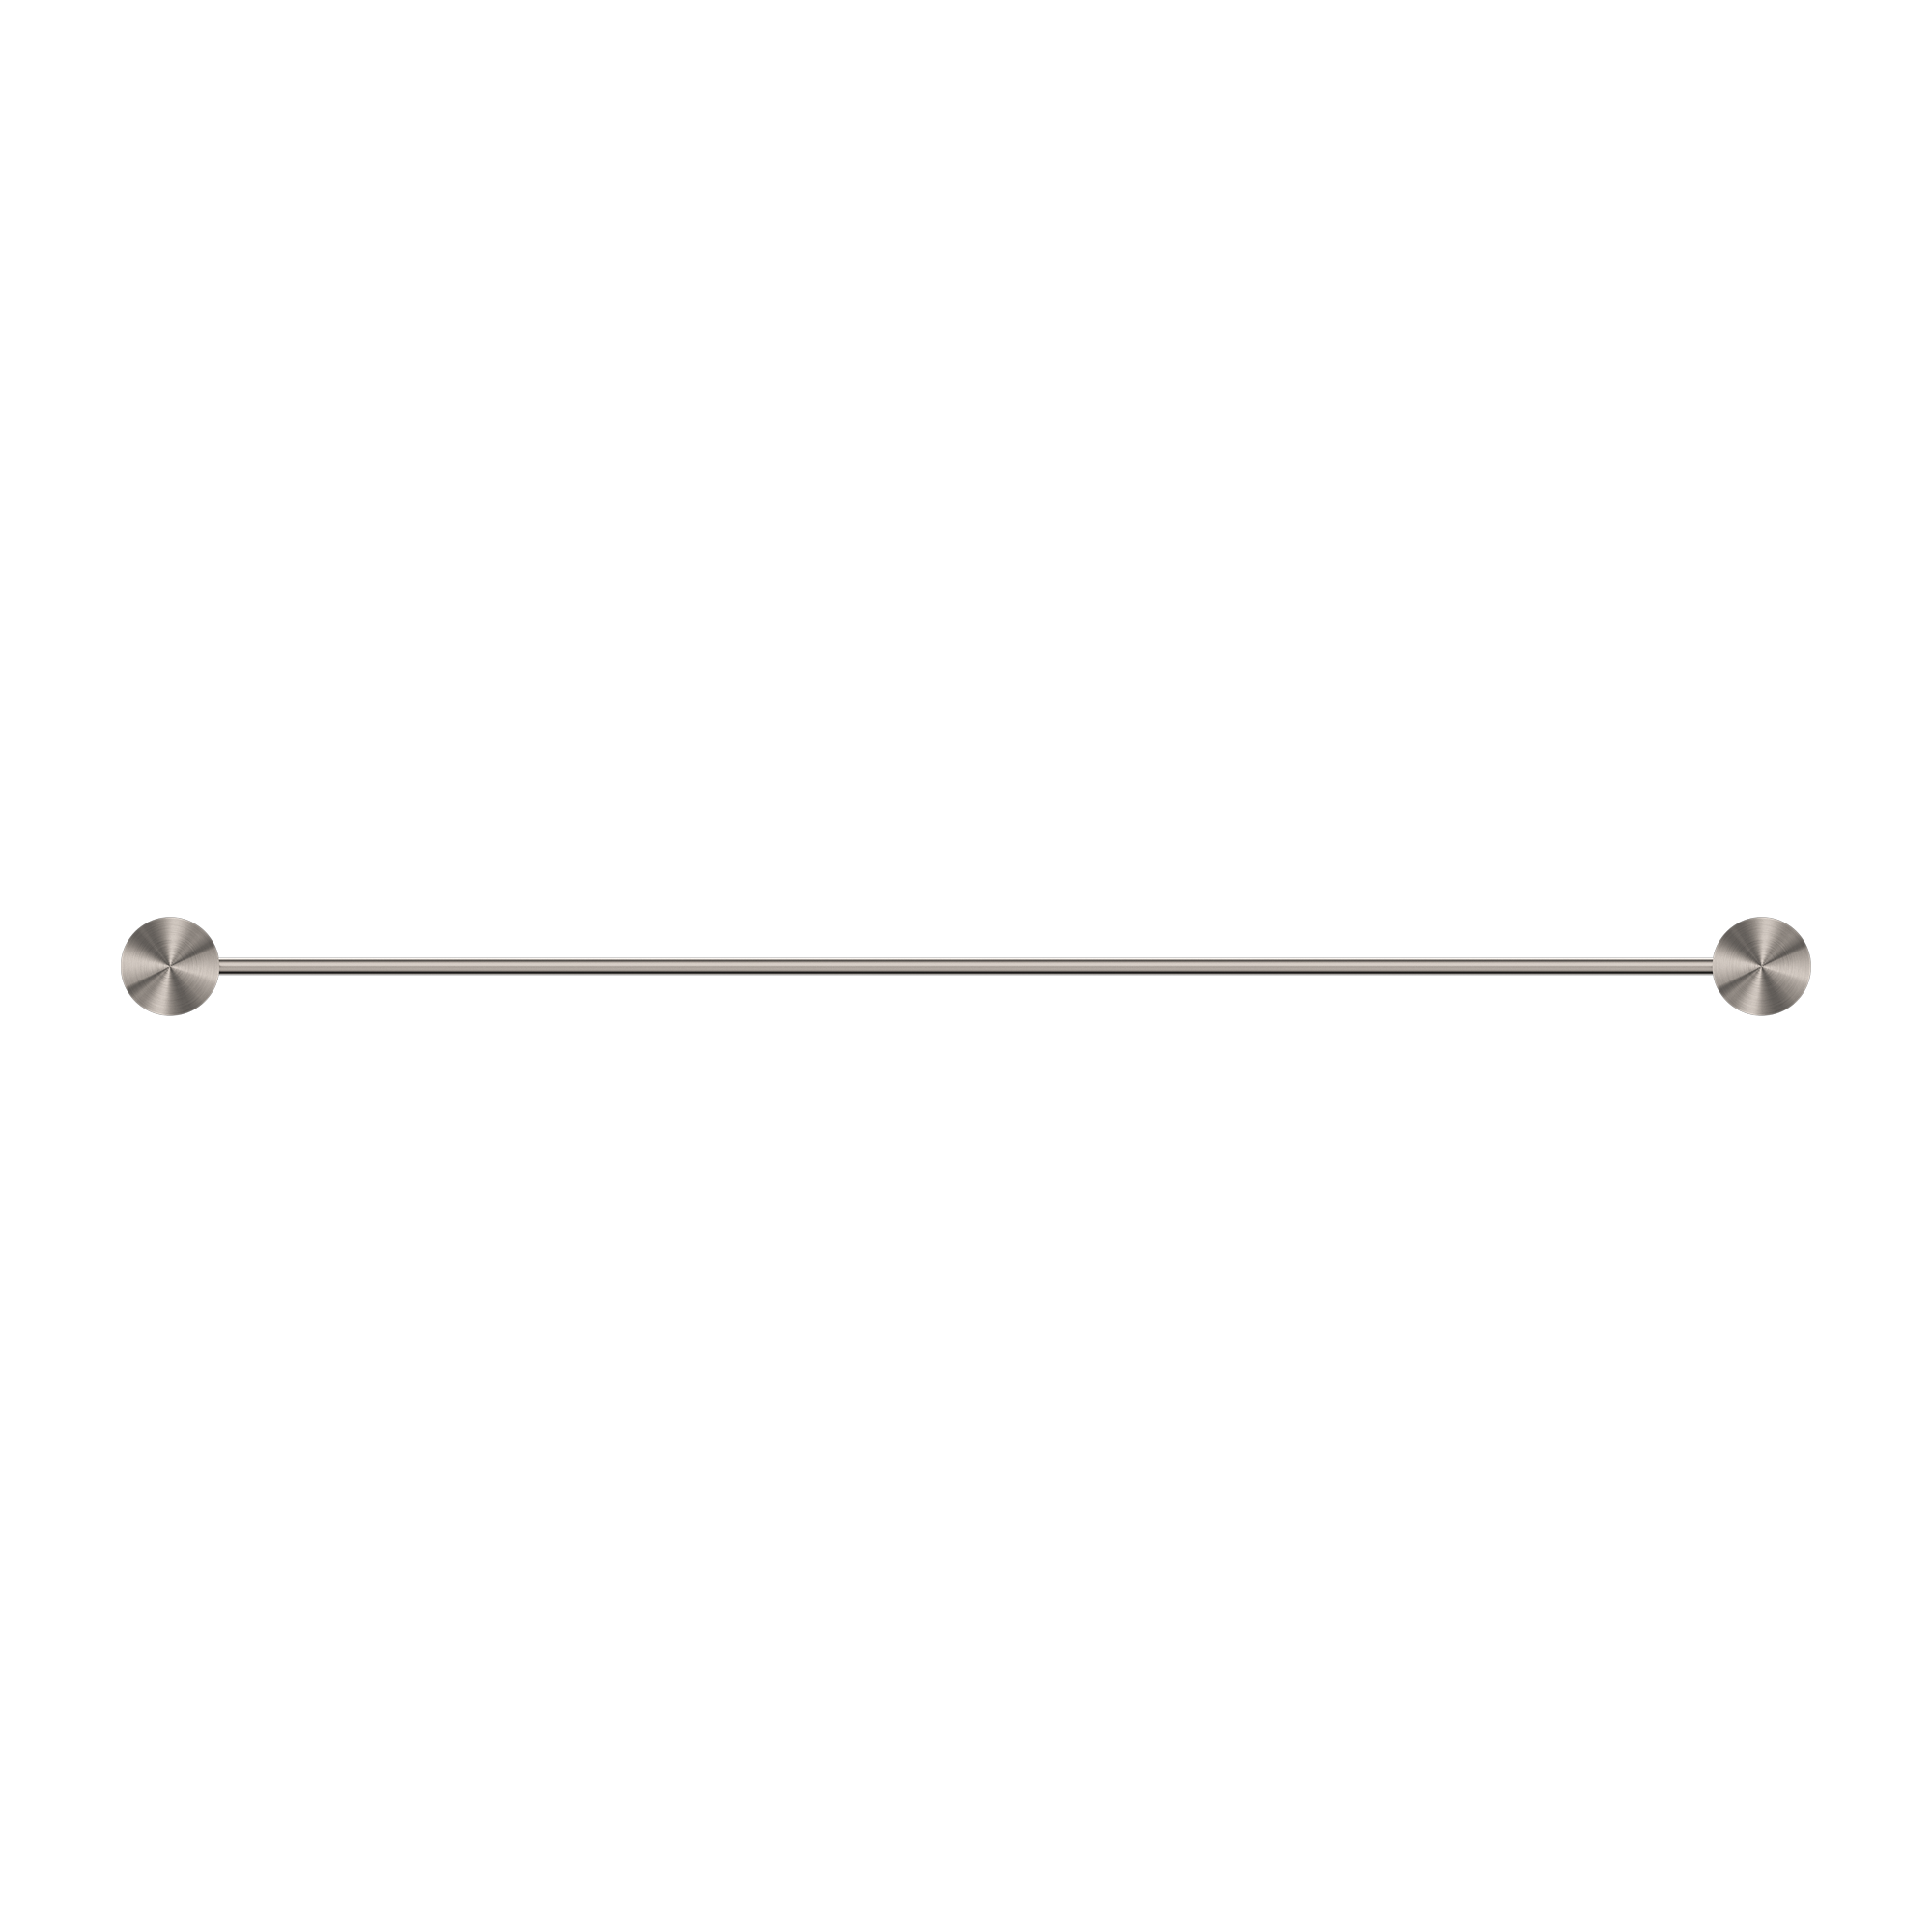 NERO OPAL NON-HEATED SINGLE TOWEL RAIL BRUSHED NICKEL (AVAILABLE IN 600MM AND 800MM)